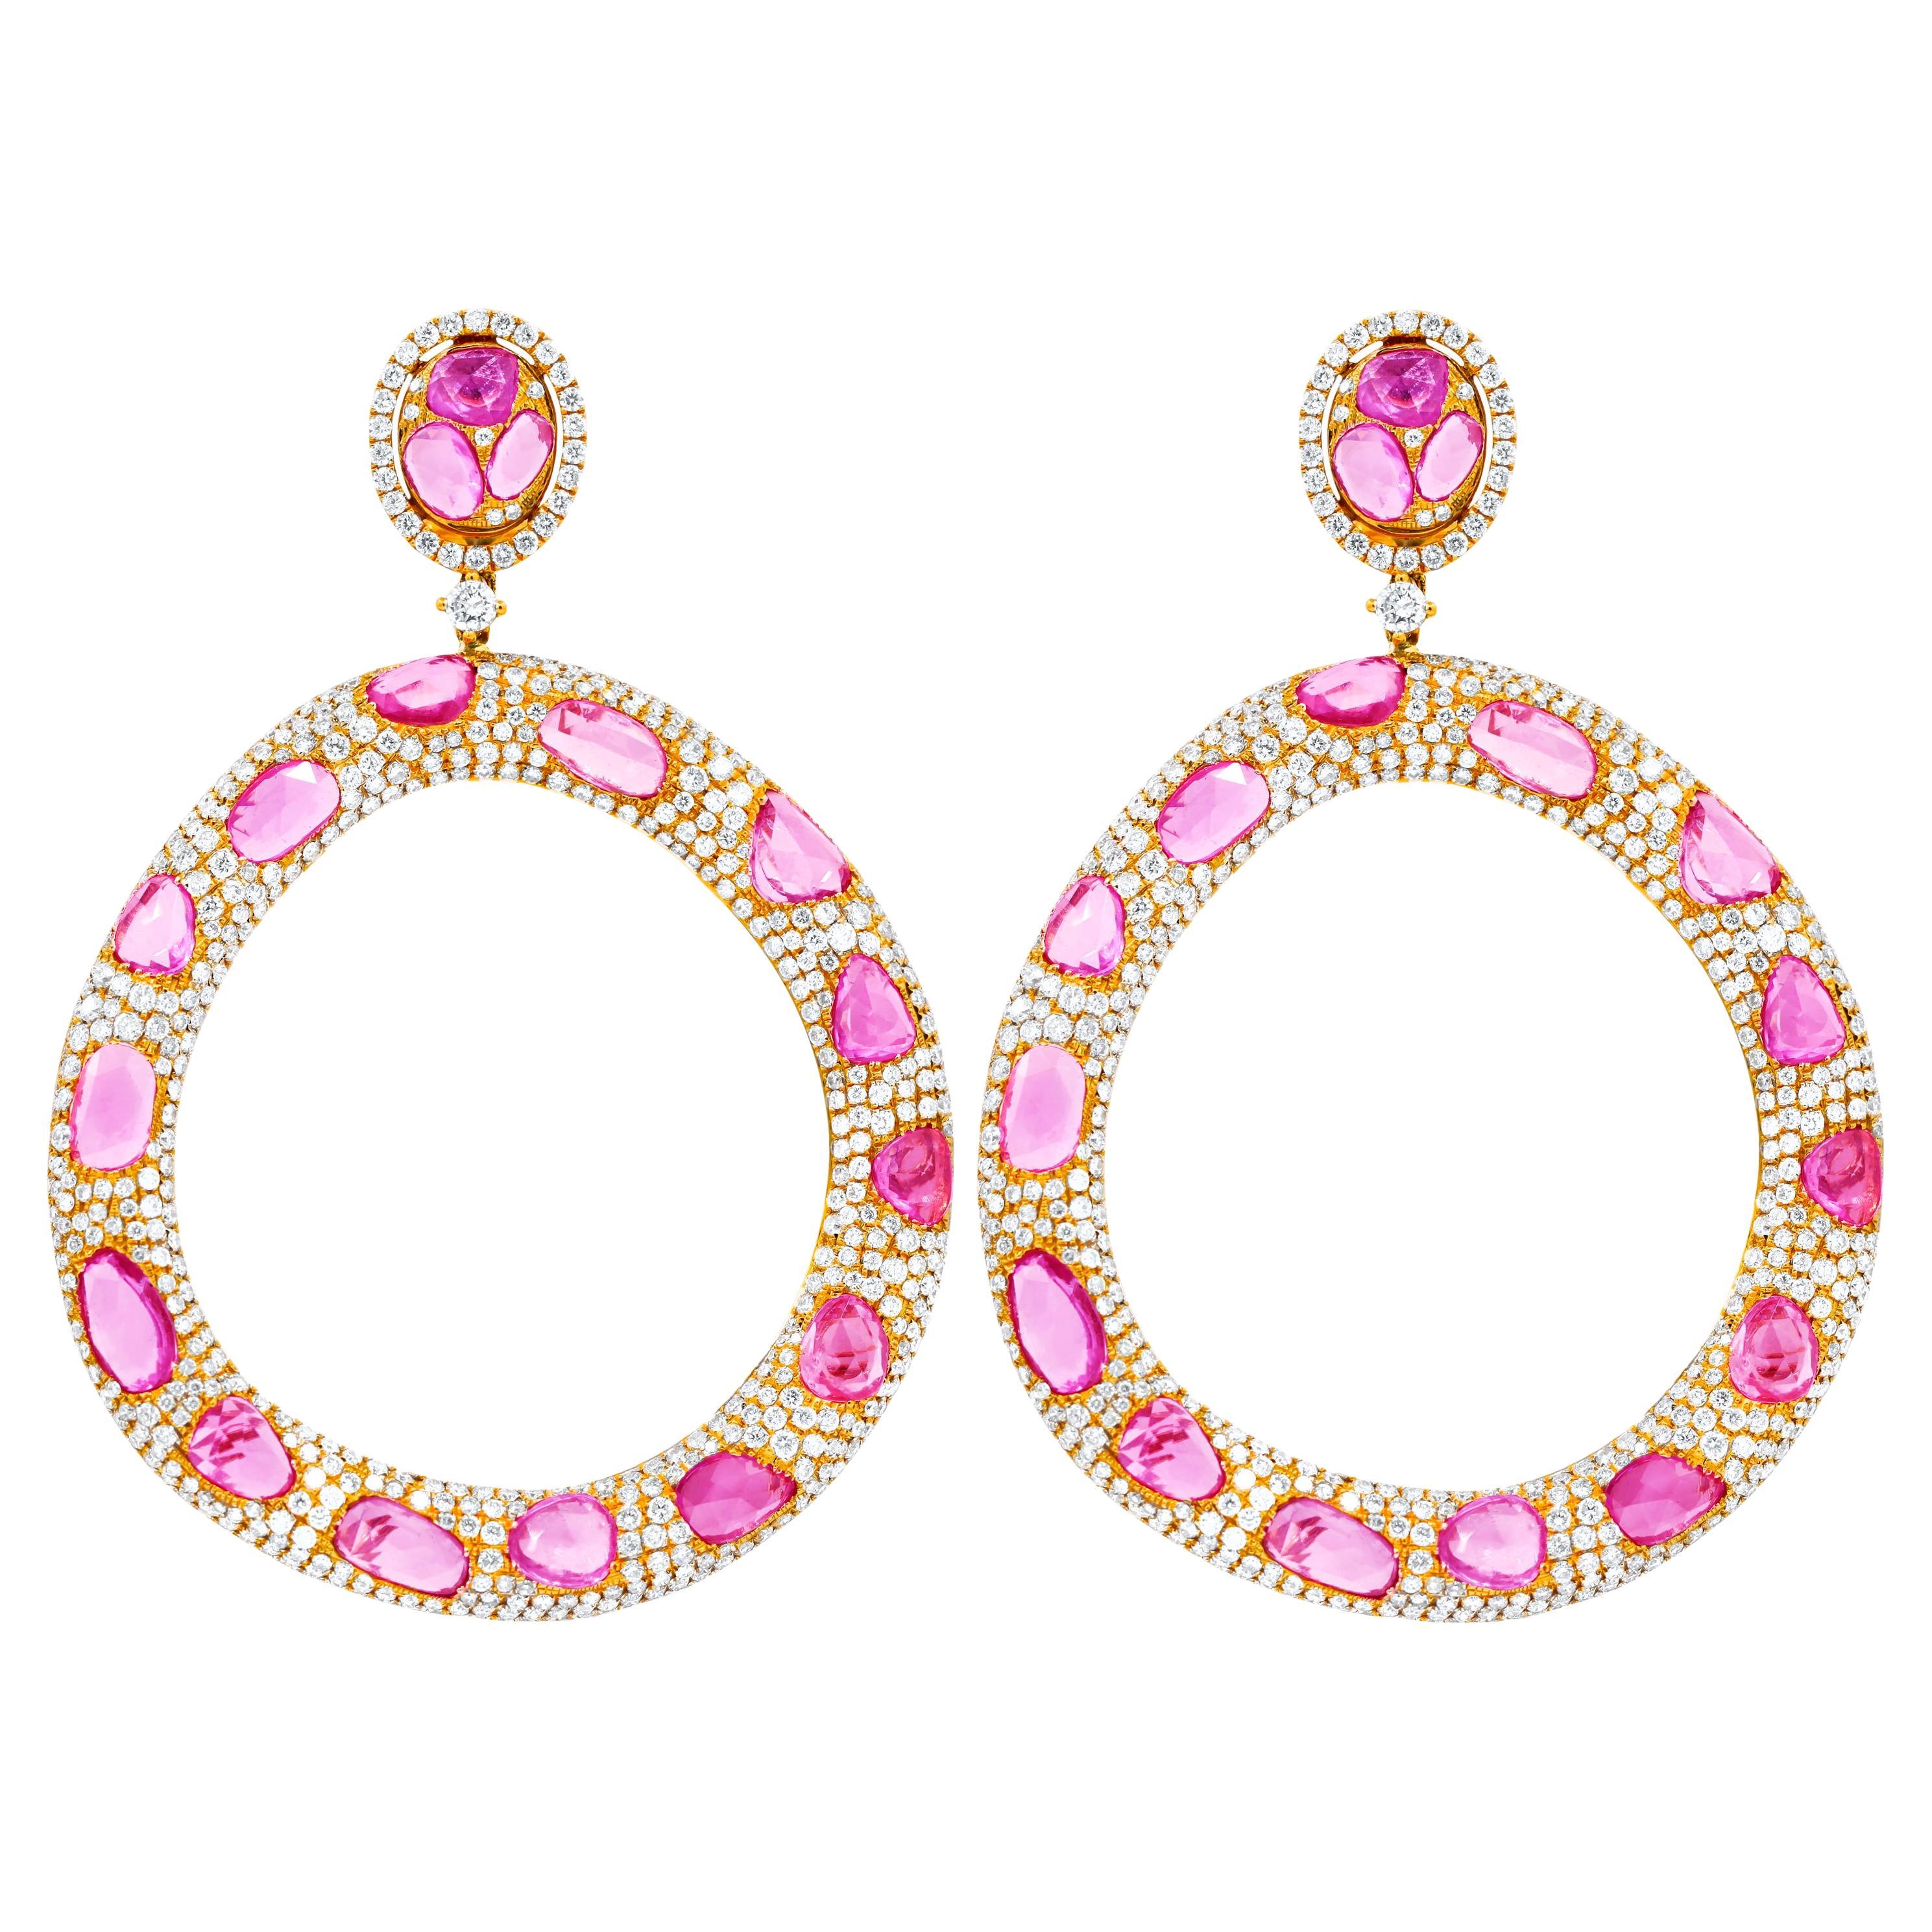 Diana M. 18 kt Rose Gold Pink Sapphire and Diamond Earrings Containing 19.20 cts For Sale